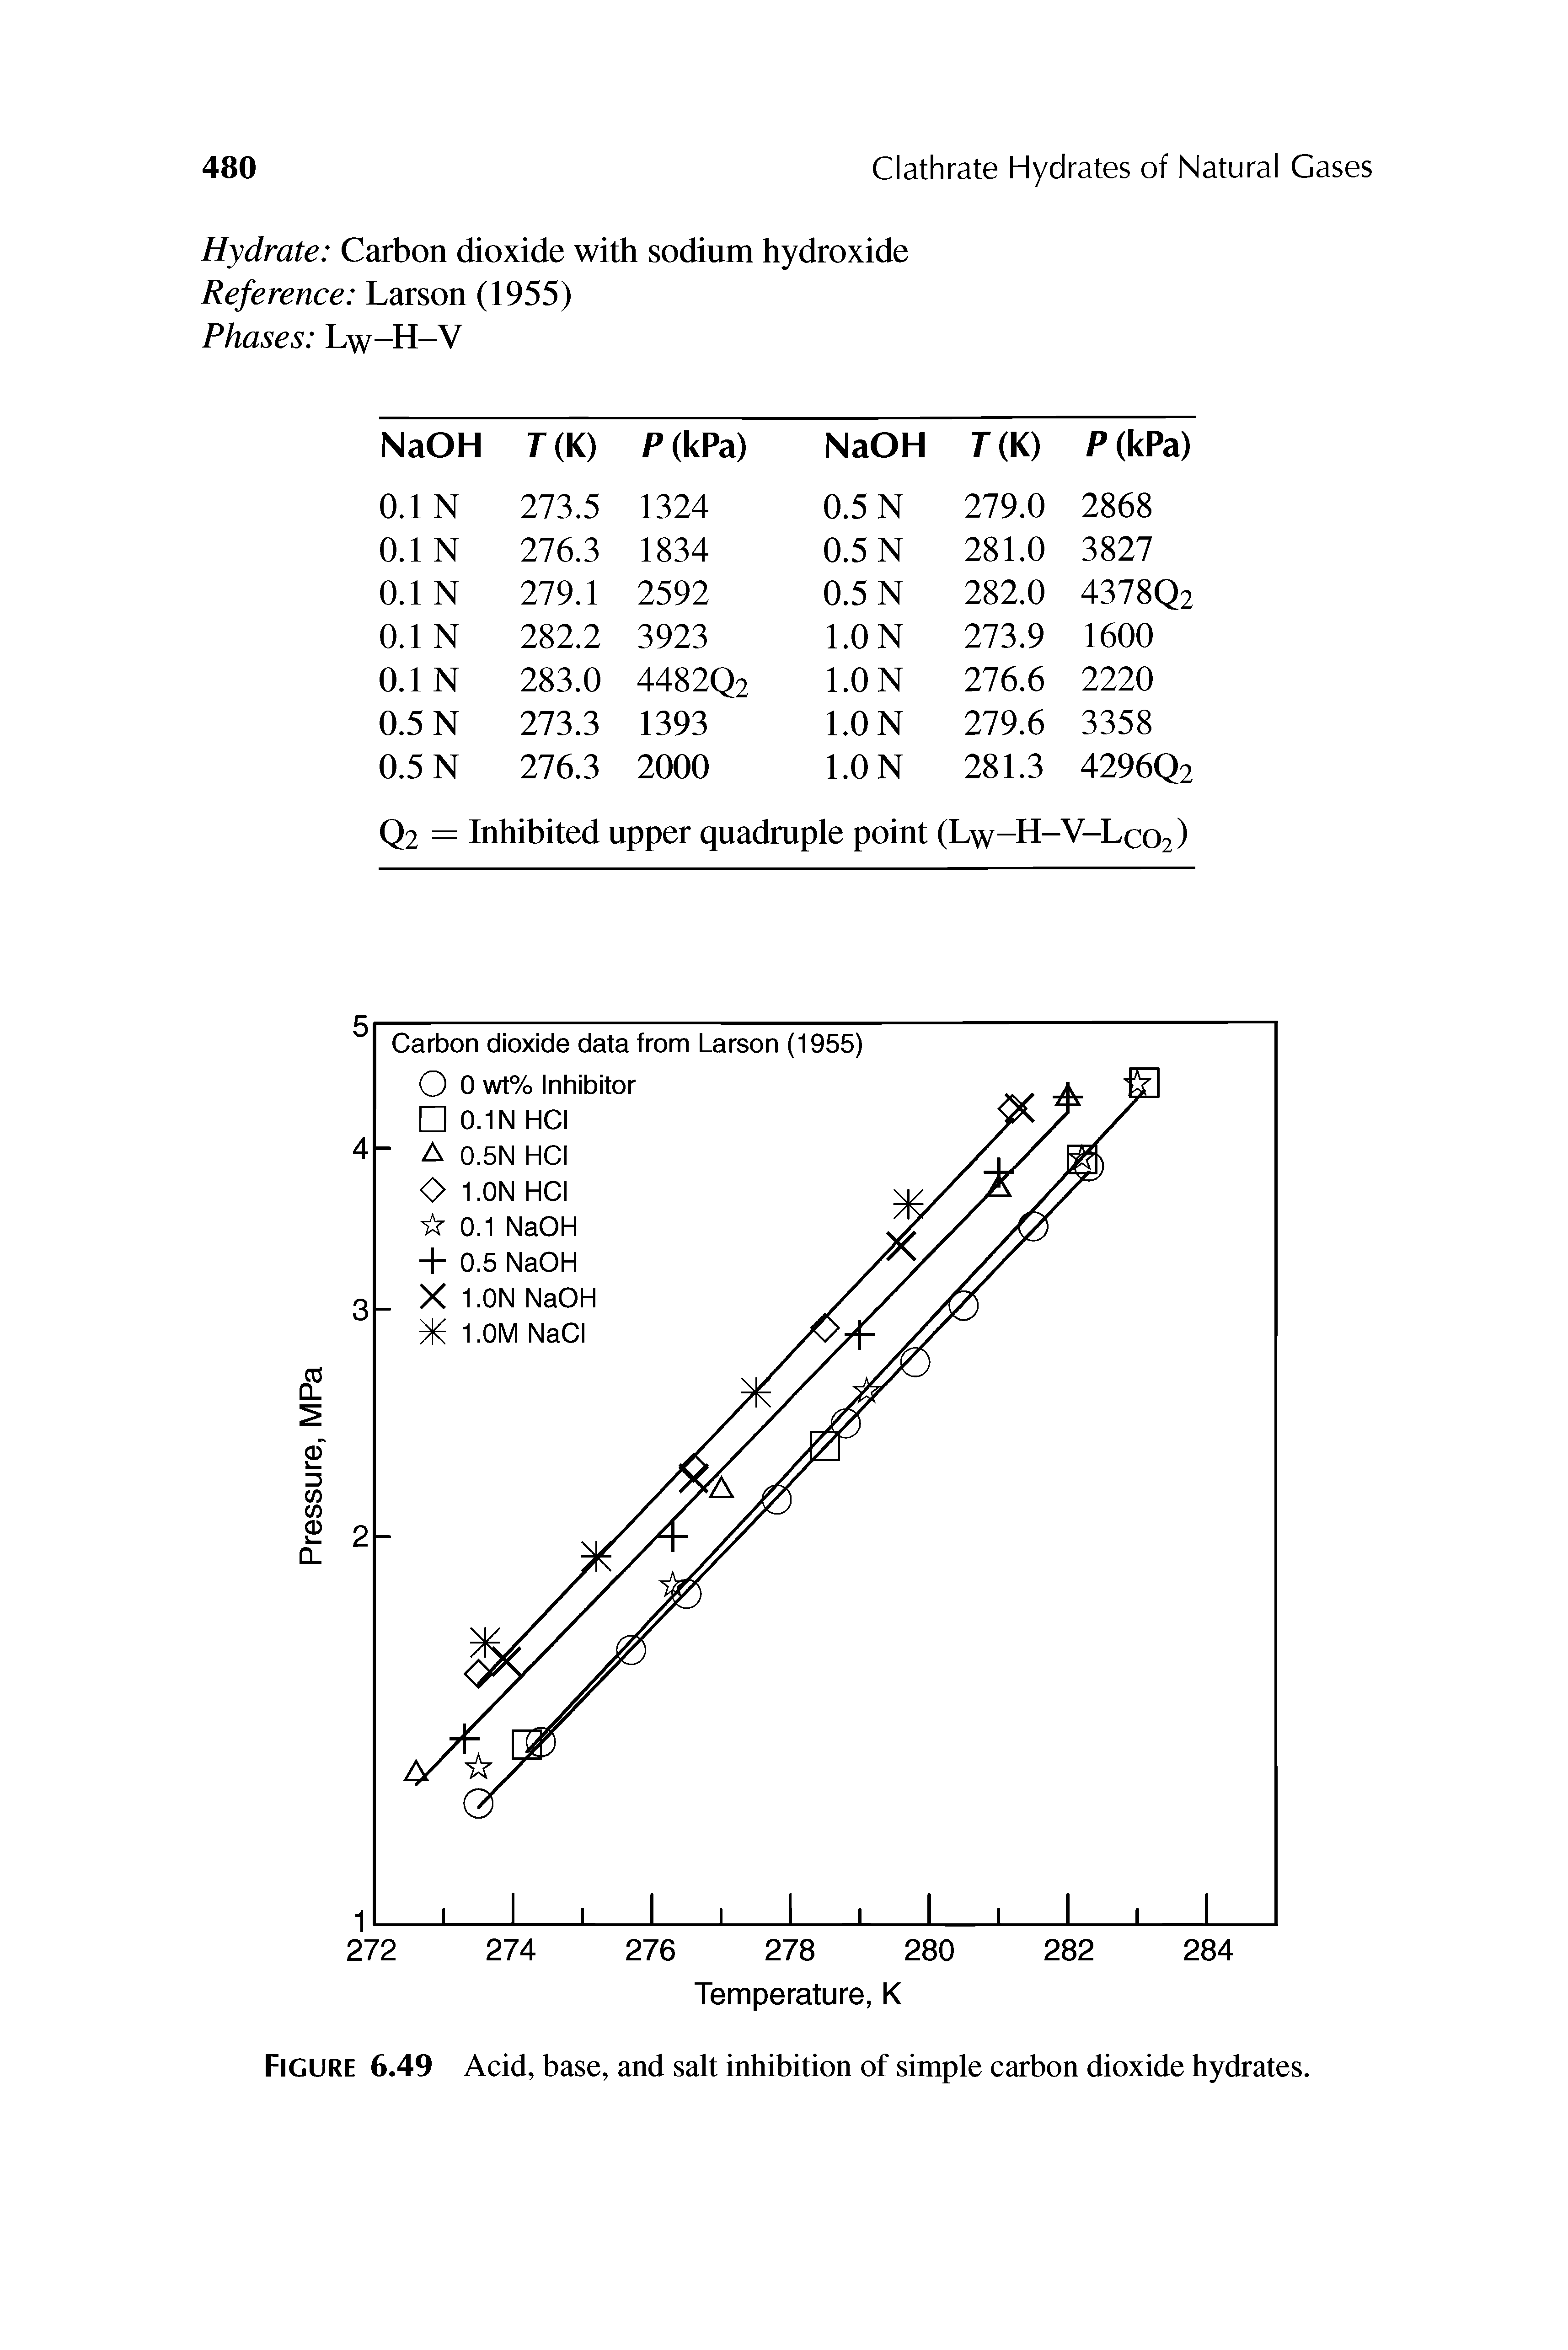 Figure 6.49 Acid, base, and salt inhibition of simple carbon dioxide hydrates.